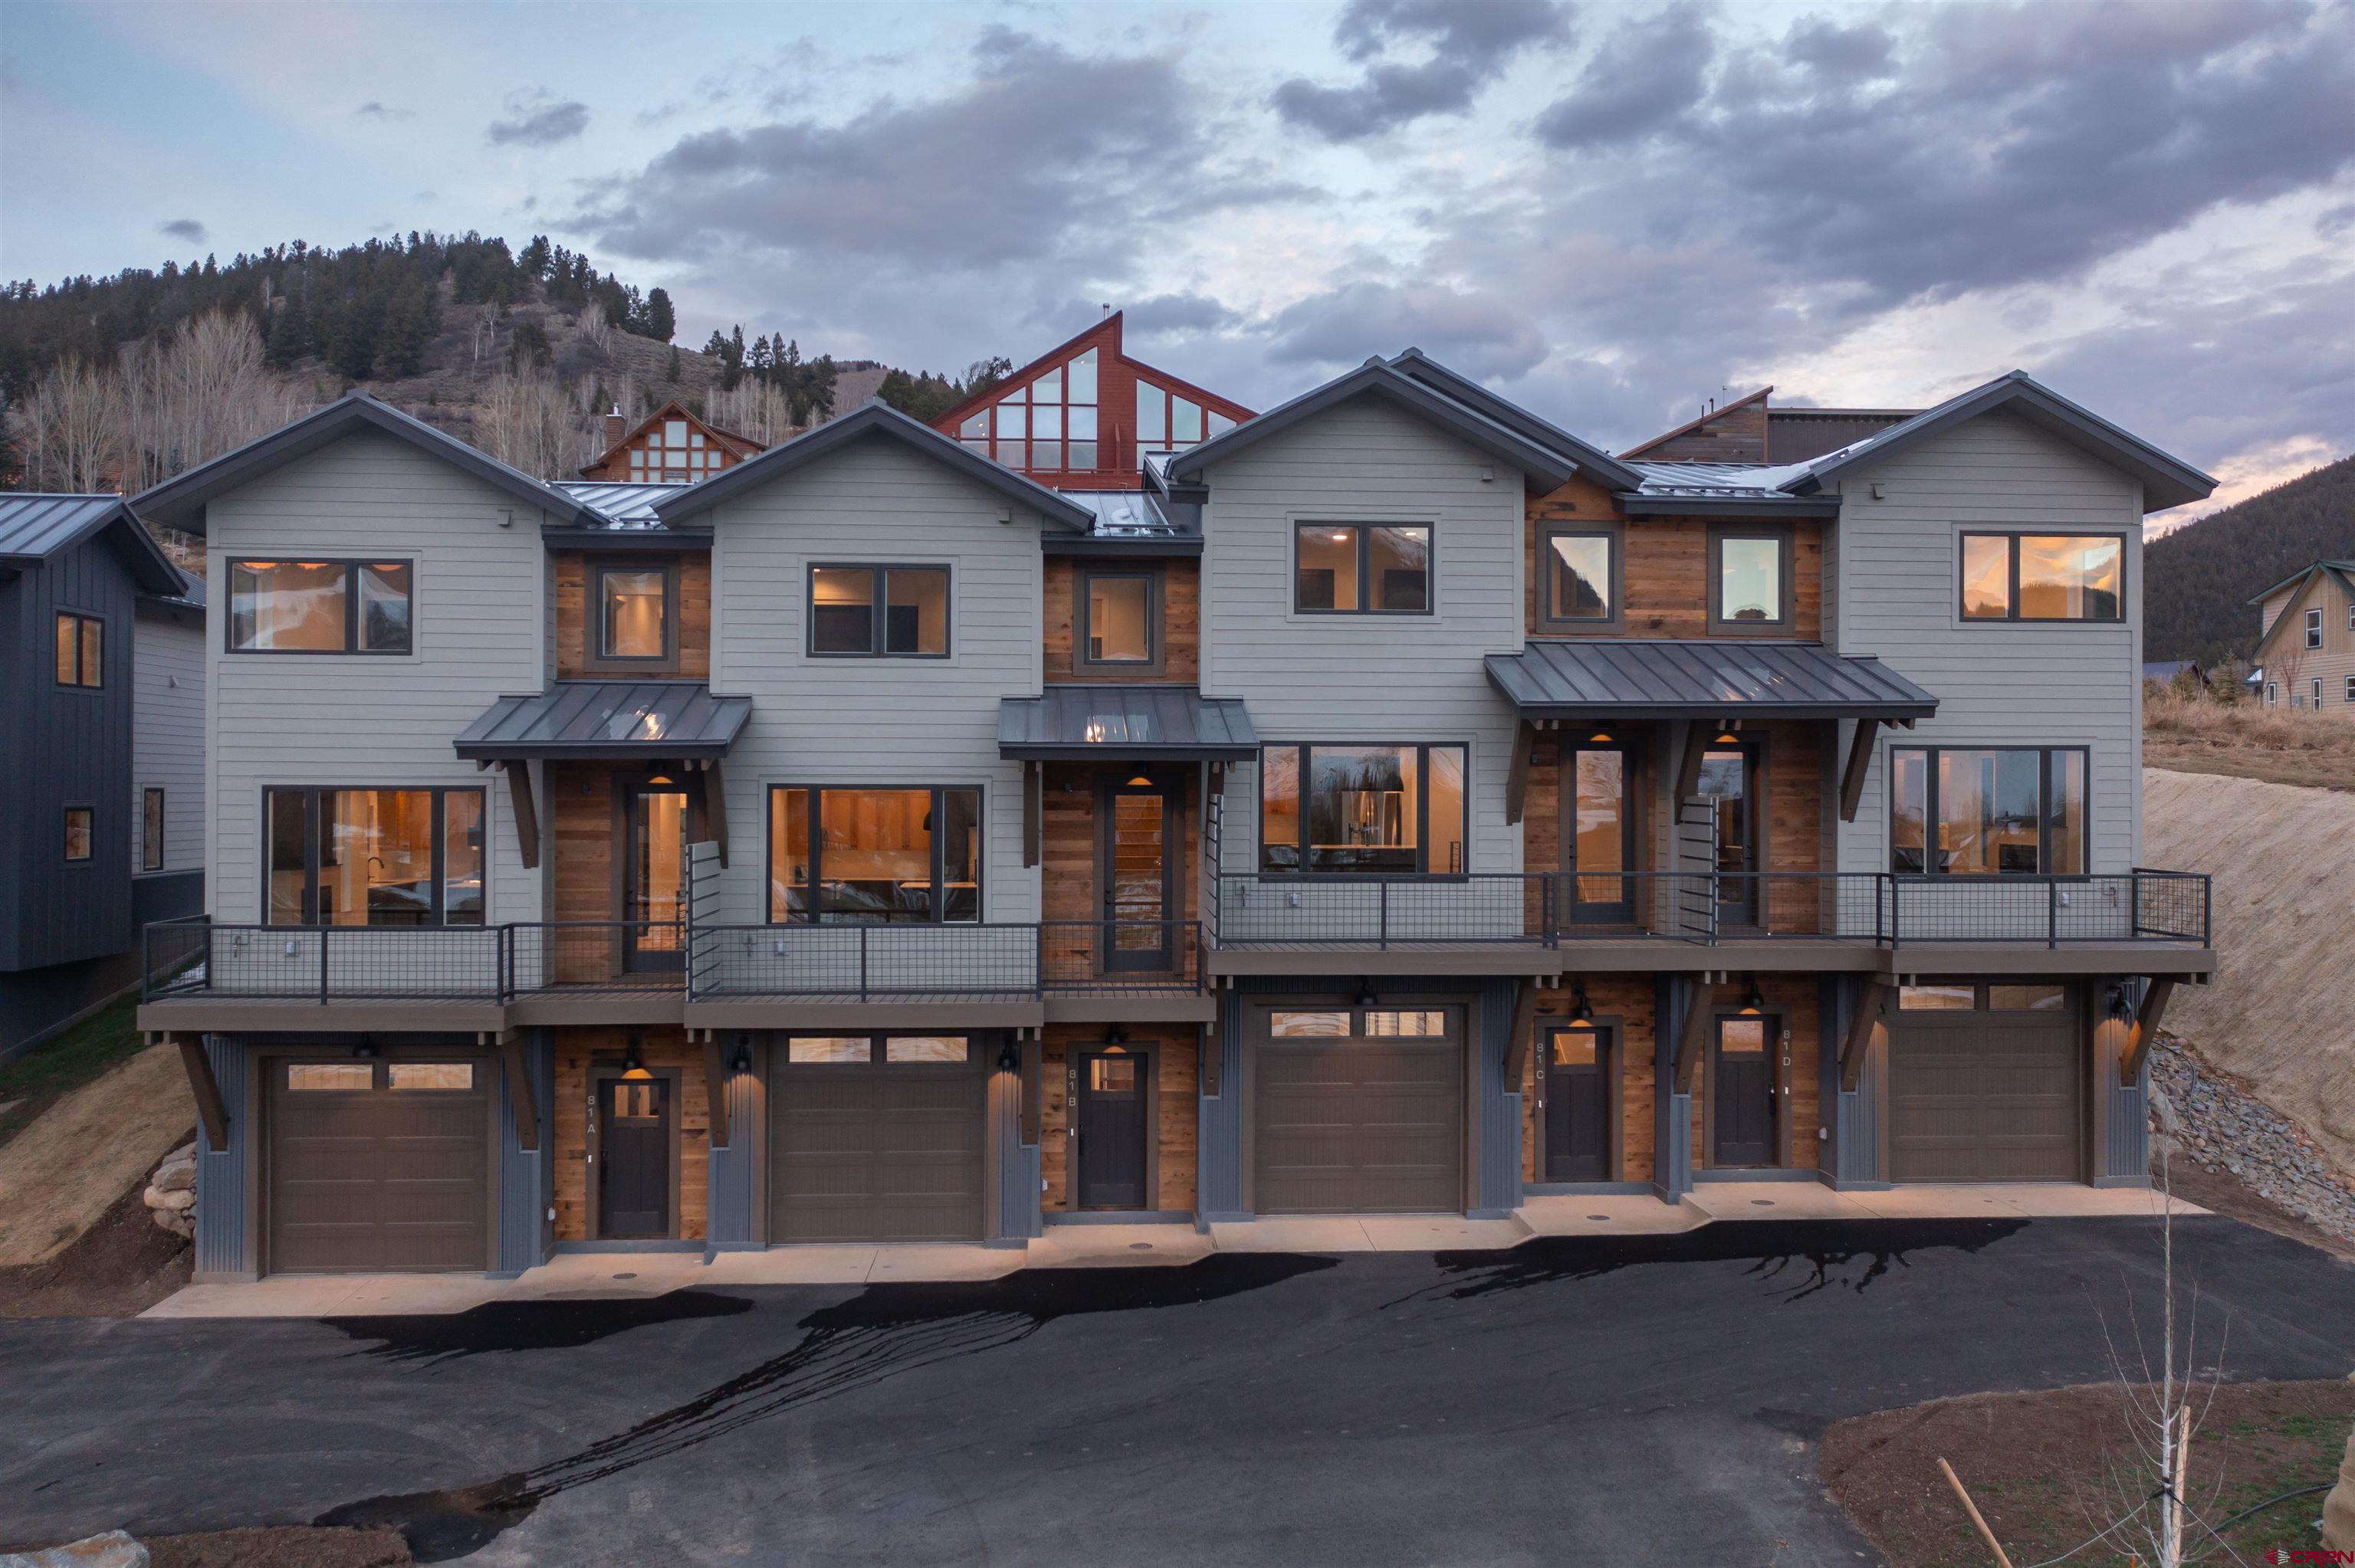 Photo of 81 Haverly St 3B in Crested Butte, CO